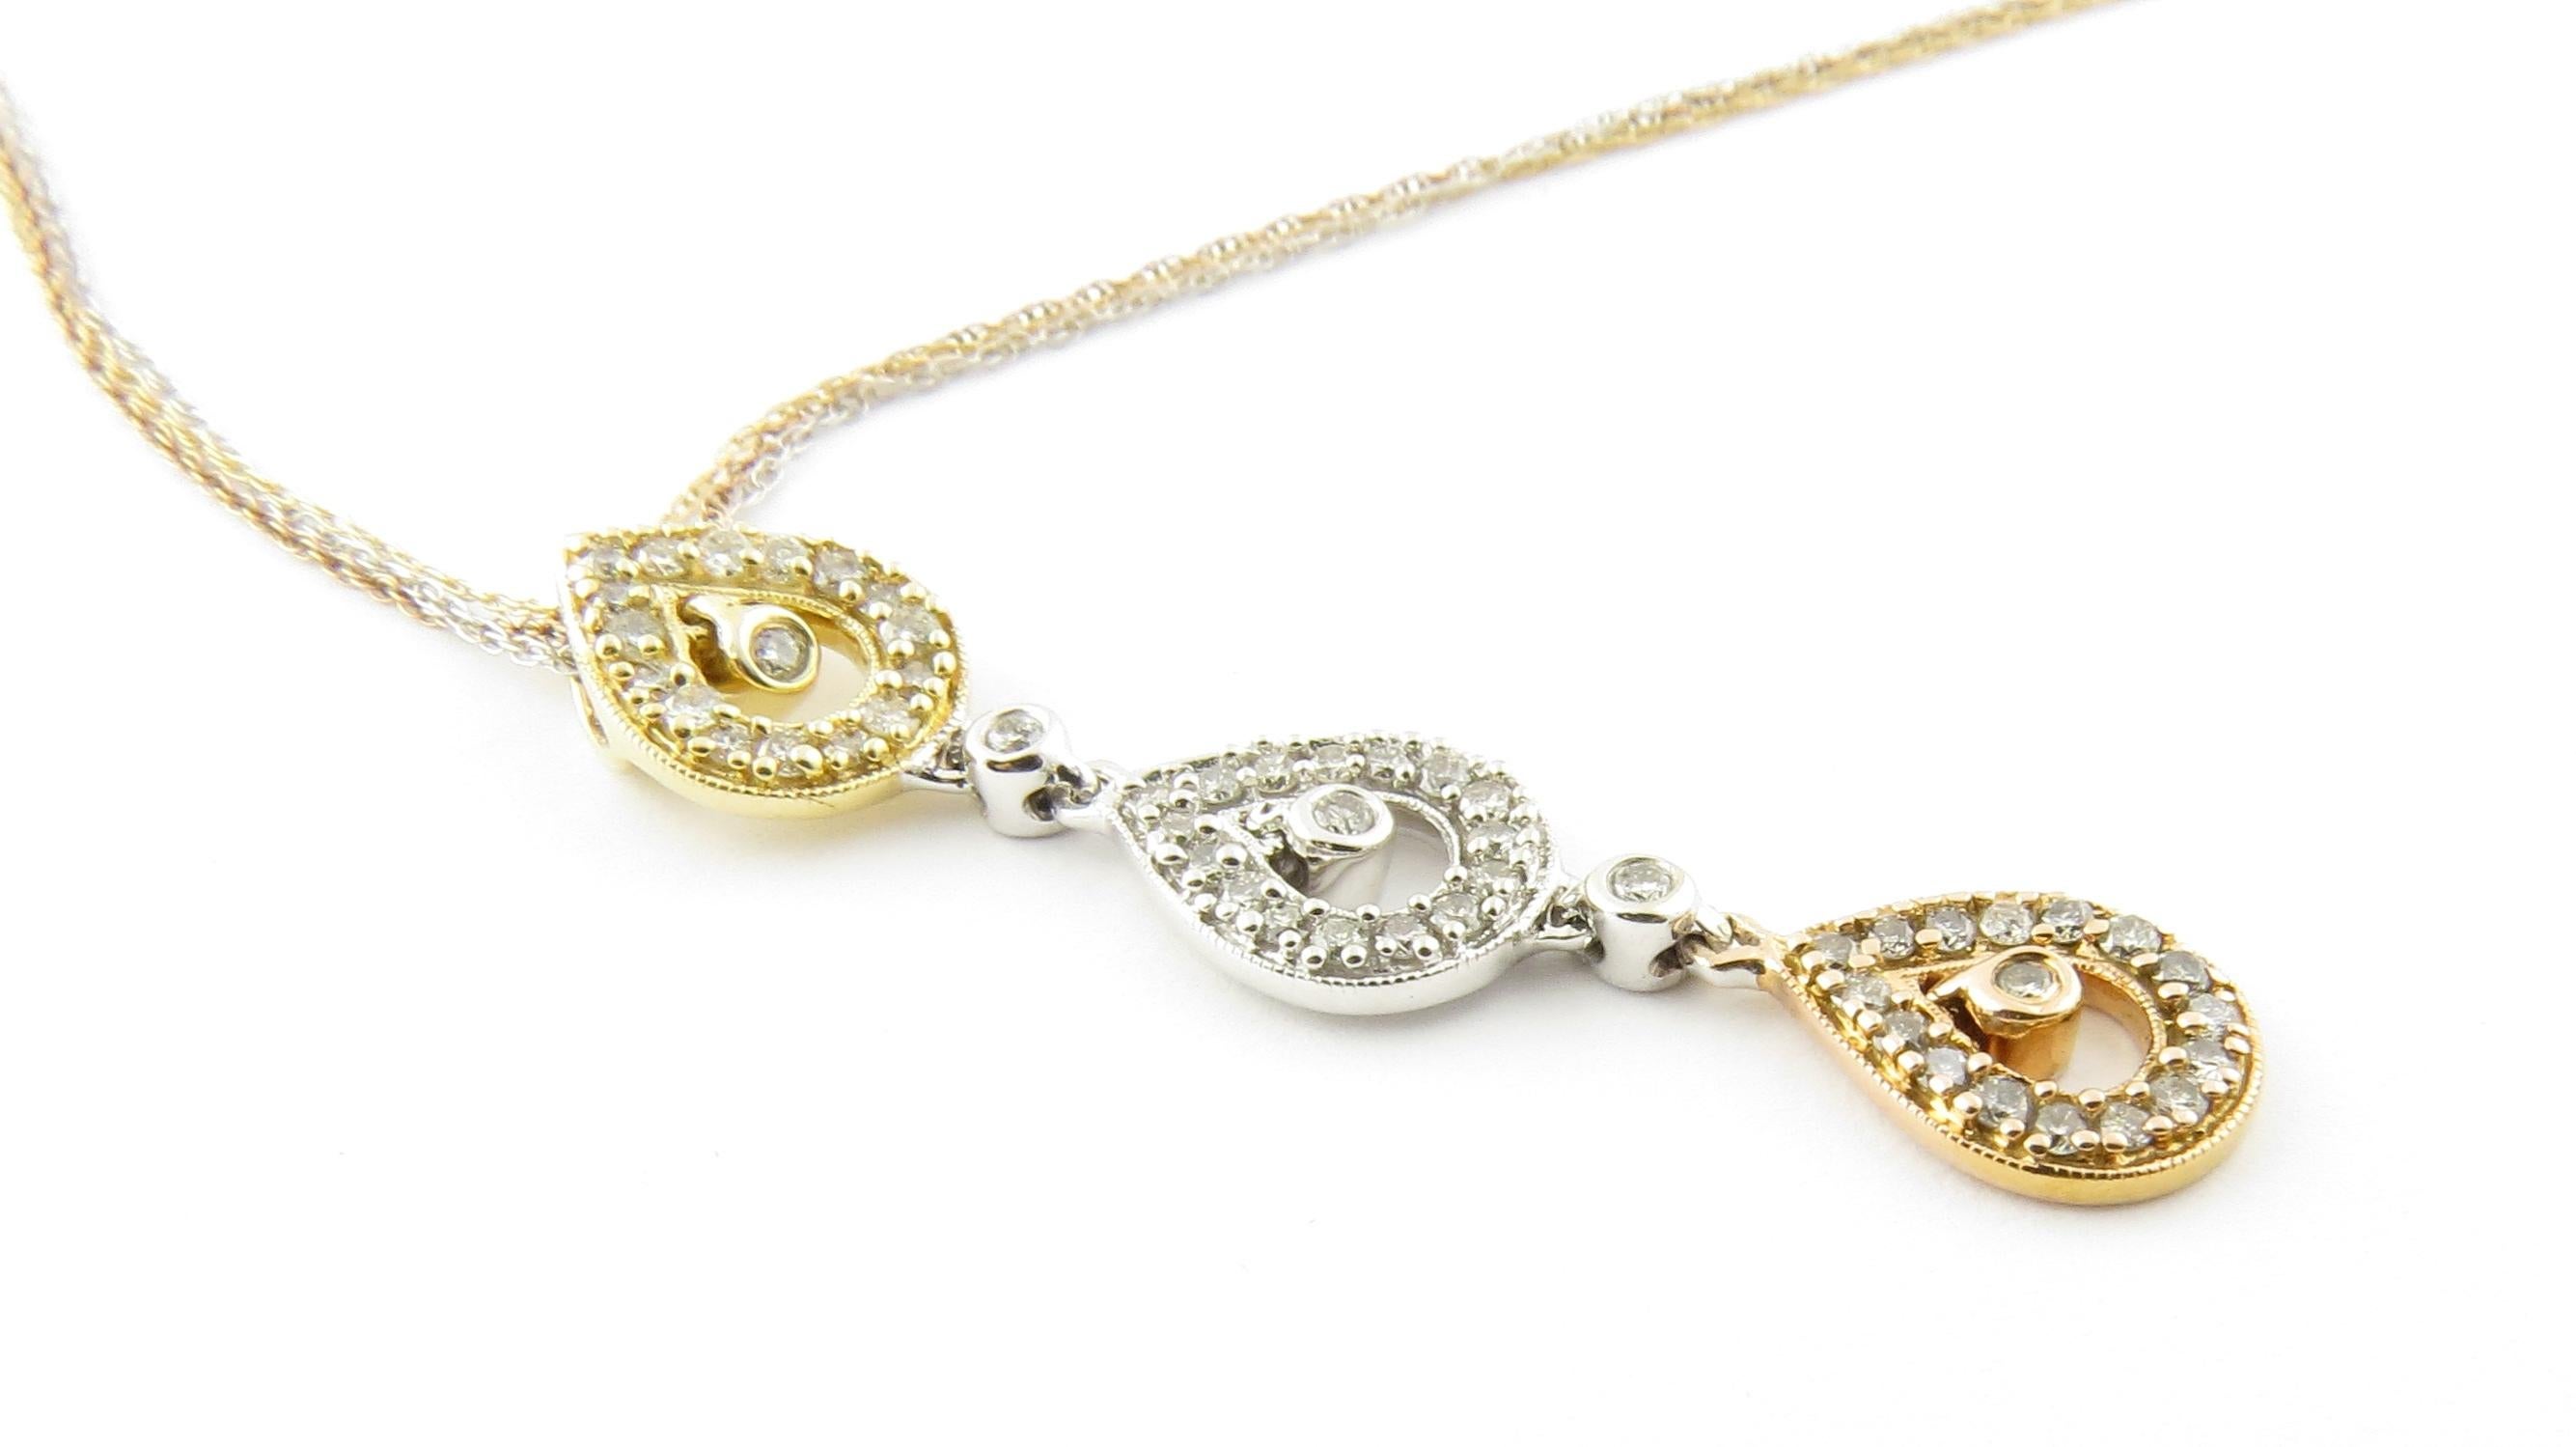 Vintage 14 Karat Yellow, Rose and White Gold Diamond Pendant Necklace.

This lovely pendant features three drops crafted in yellow, white and pink gold and detailed with 51 round brilliant cut diamonds. Suspended from a triple tricolor